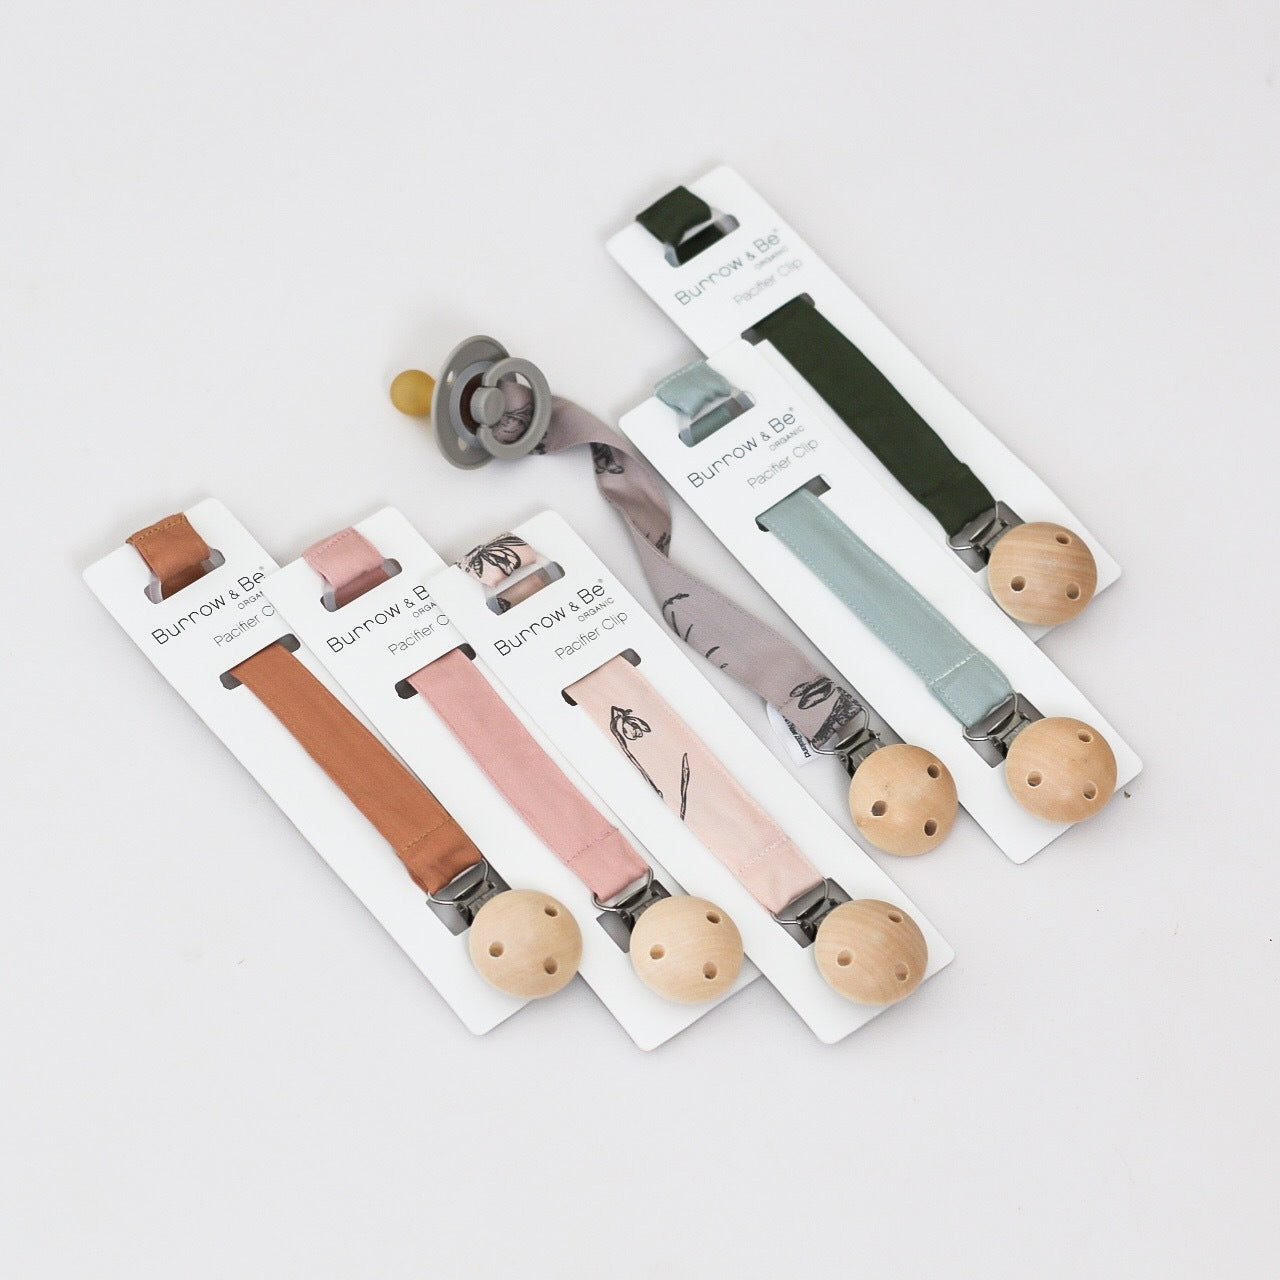 Burrow & Be | Essentials Pacifier clip - Found My Way Invercargill